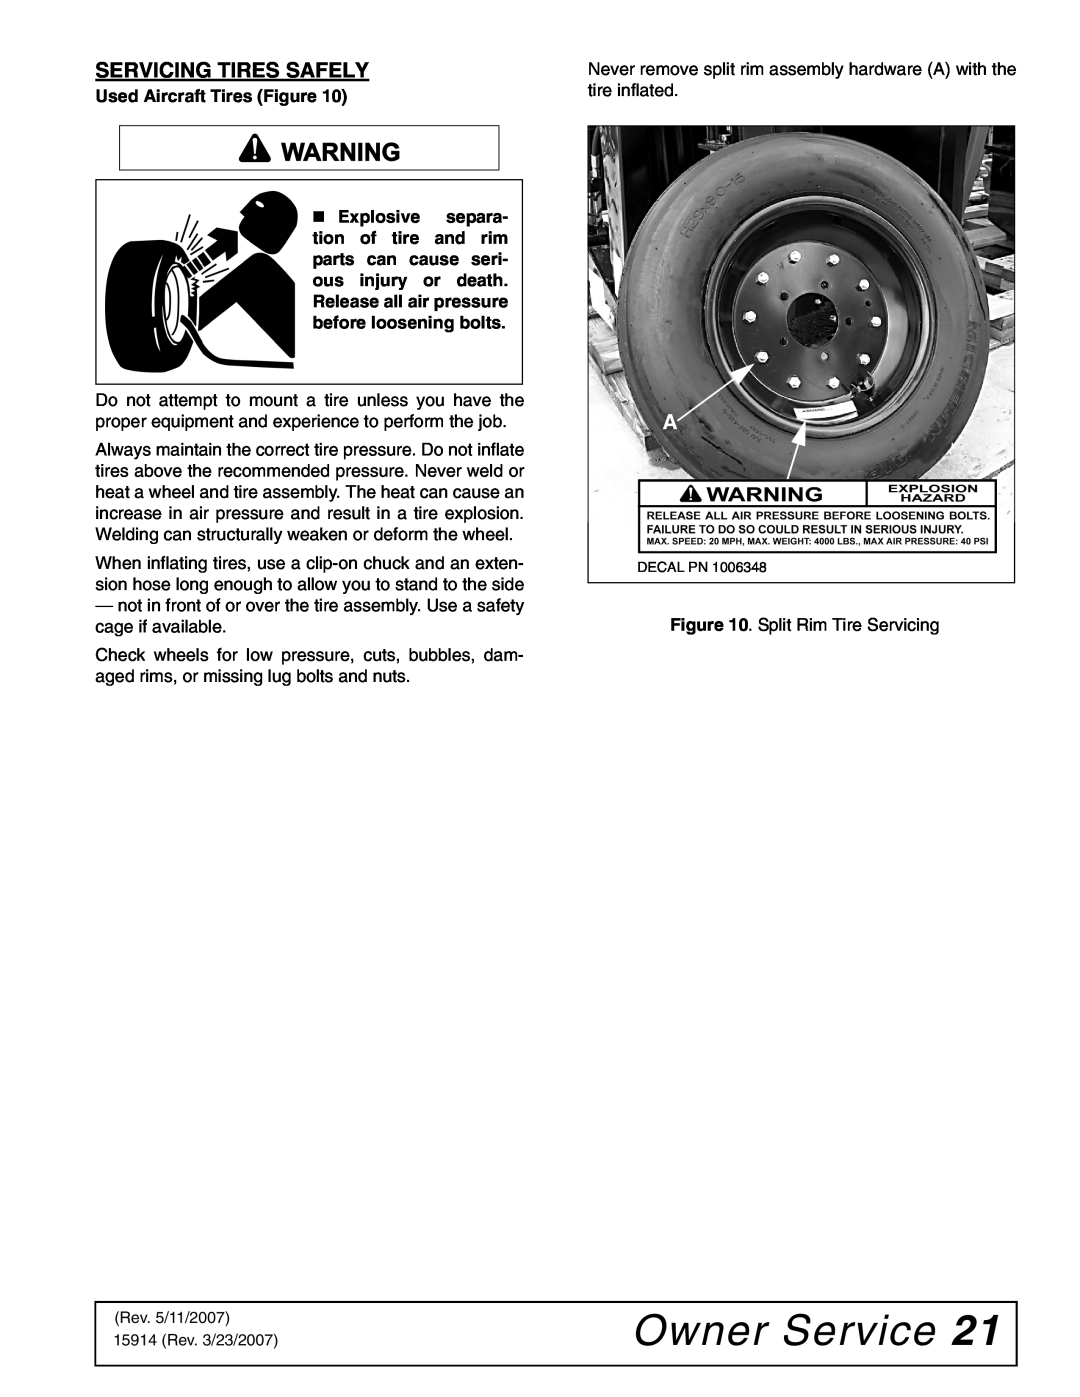 Woods Equipment MD80-2 manual Owner Service, Servicing Tires Safely 